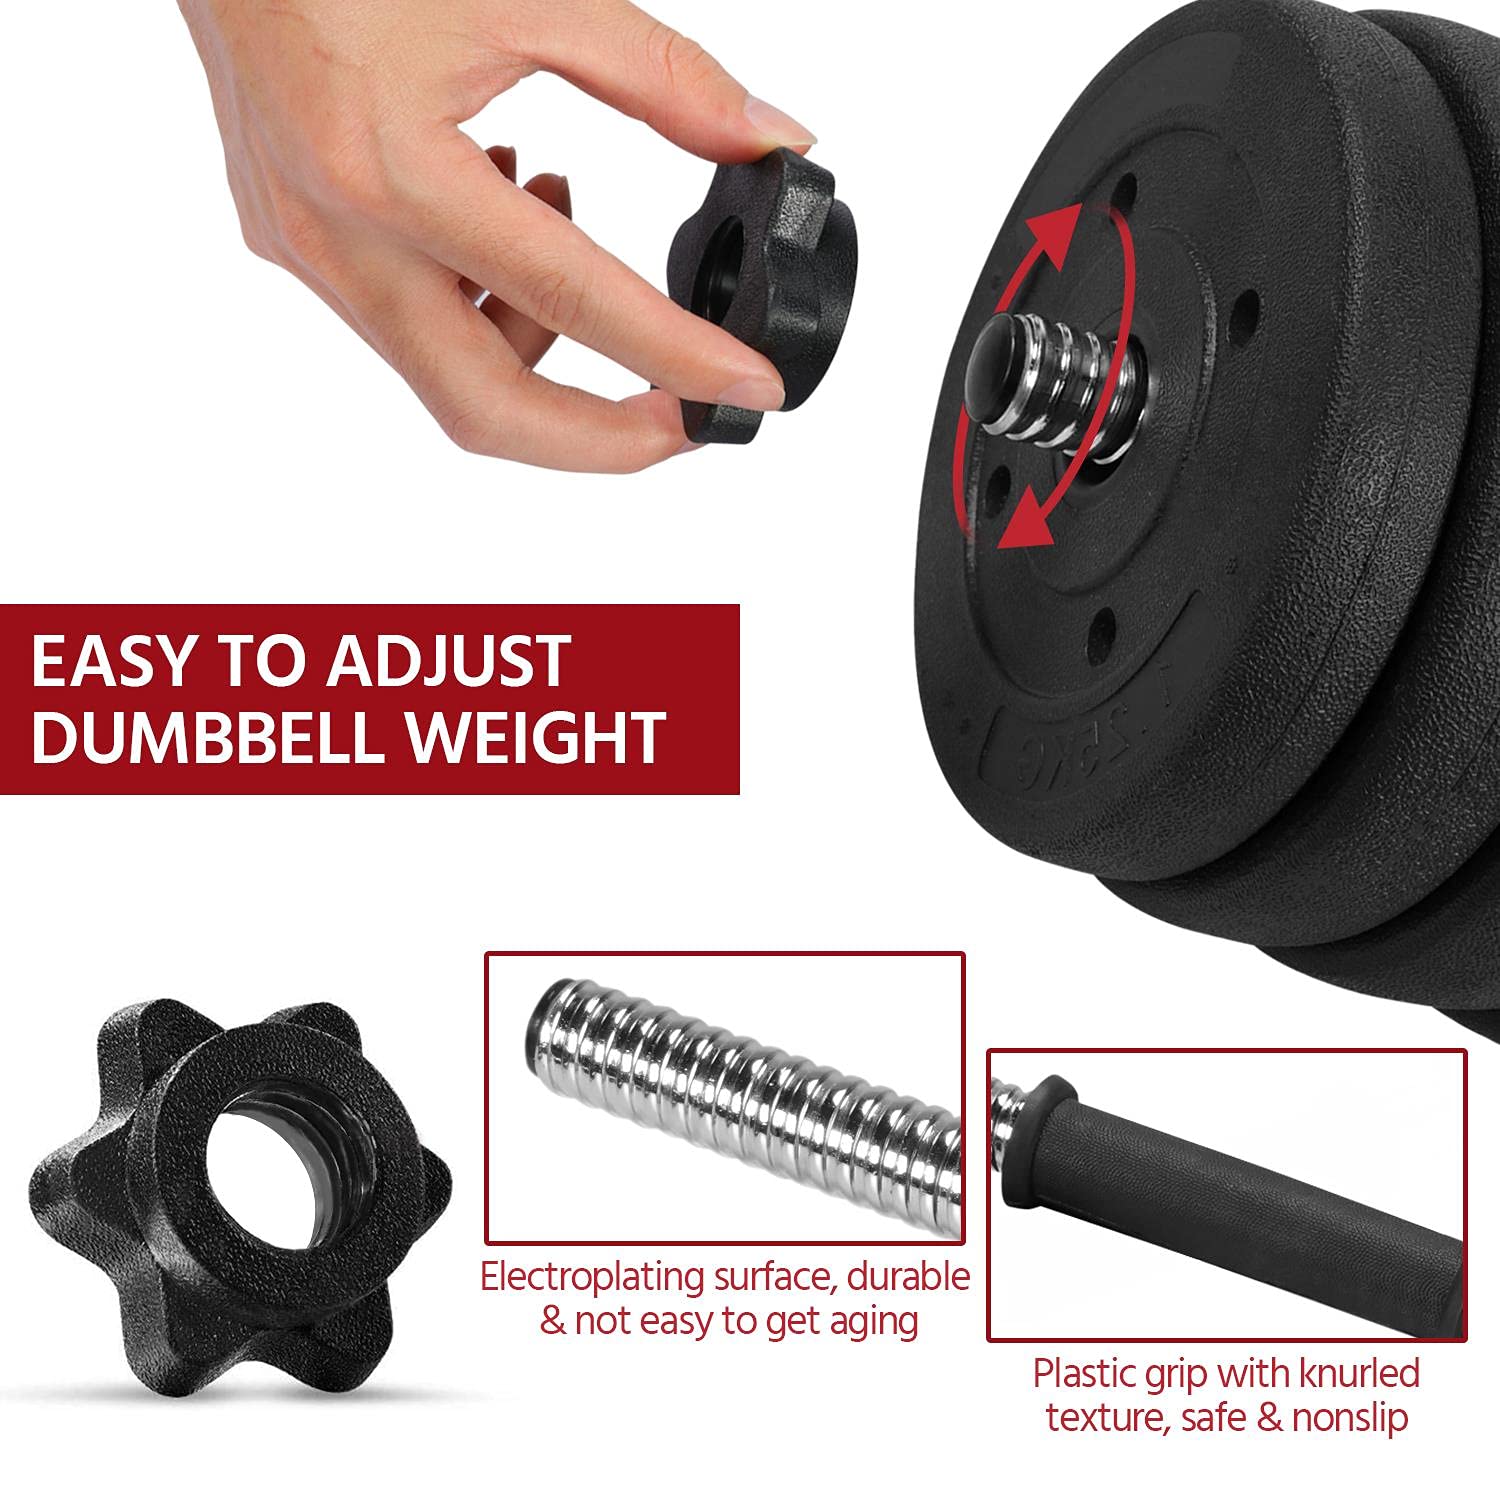 Yaheetech 66LB Adjustable Exercise & Fitness Dumbbells Set Dumbbell Pair Lifting Dumbbells Weight Set for Home Gym Strength Training w/ Non slip grip